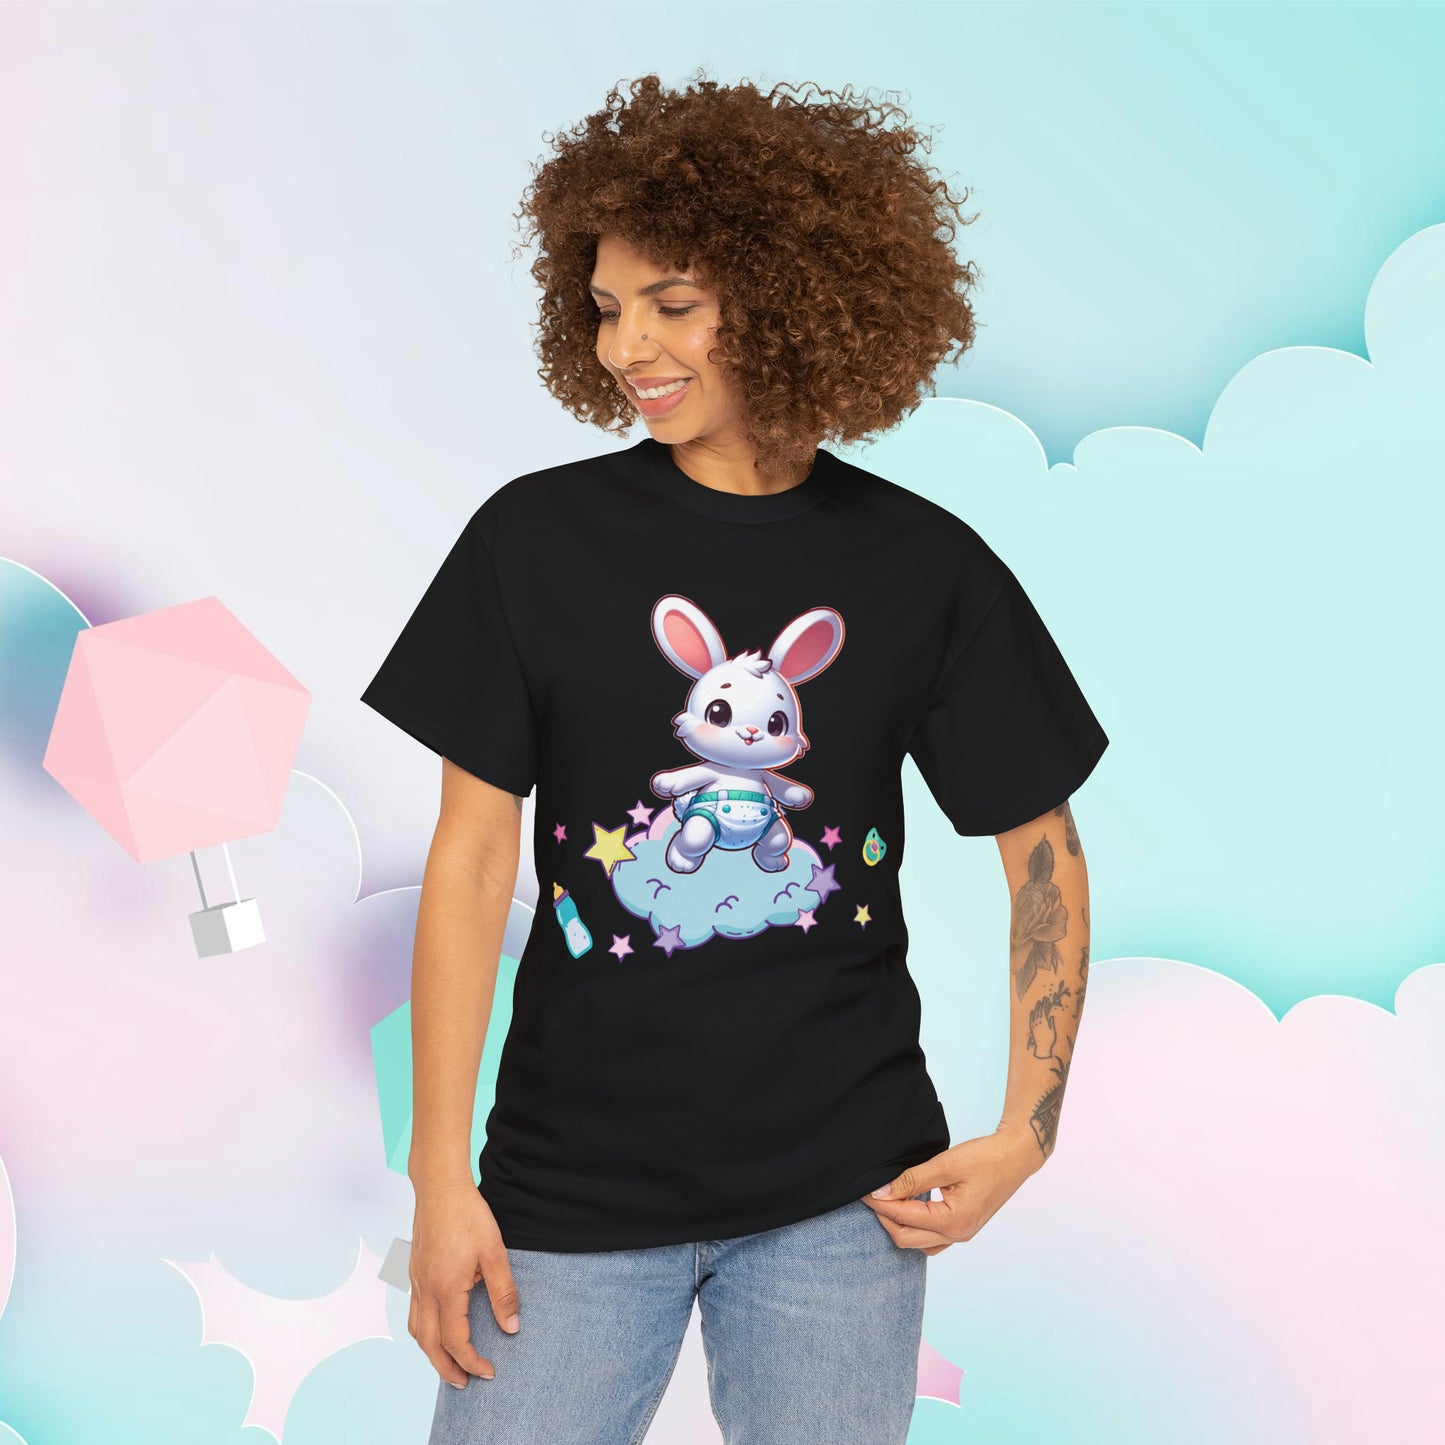 Baby Bunny Unisex T-Shirt - Adult Baby Diaper Lover - Furry Friend Tee